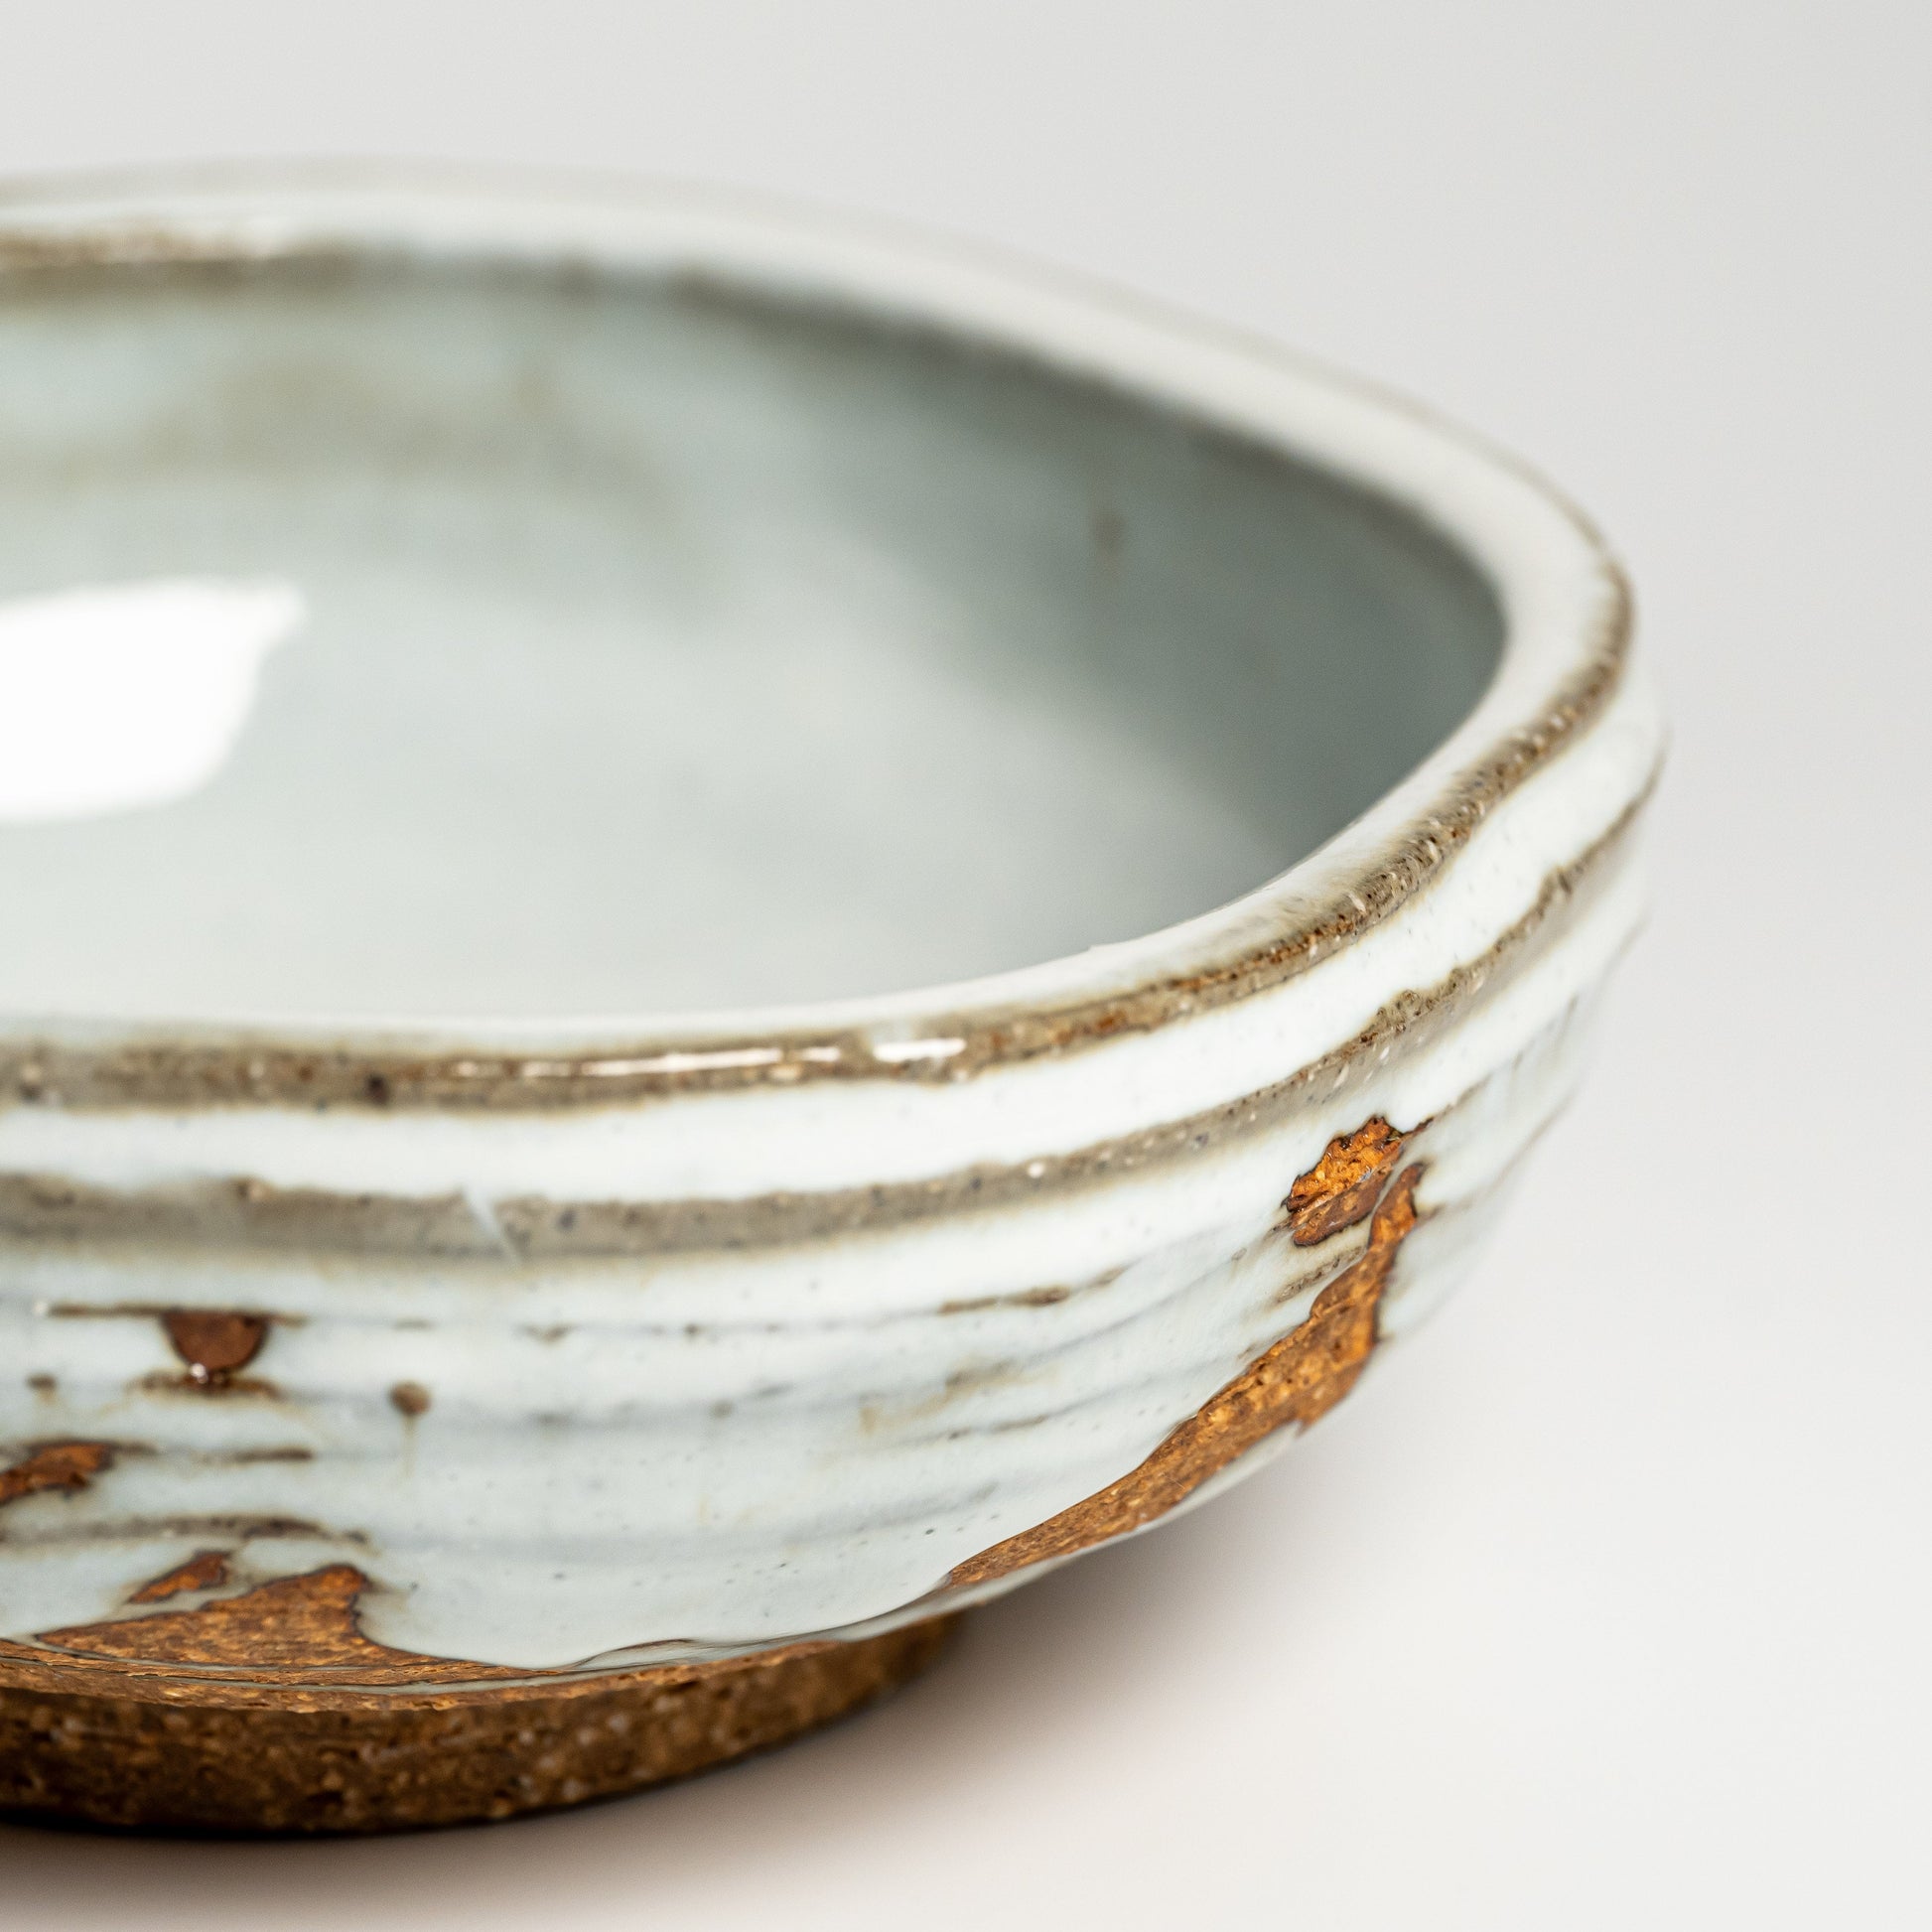 A close up of a white Hagi yaki bowl on a white background